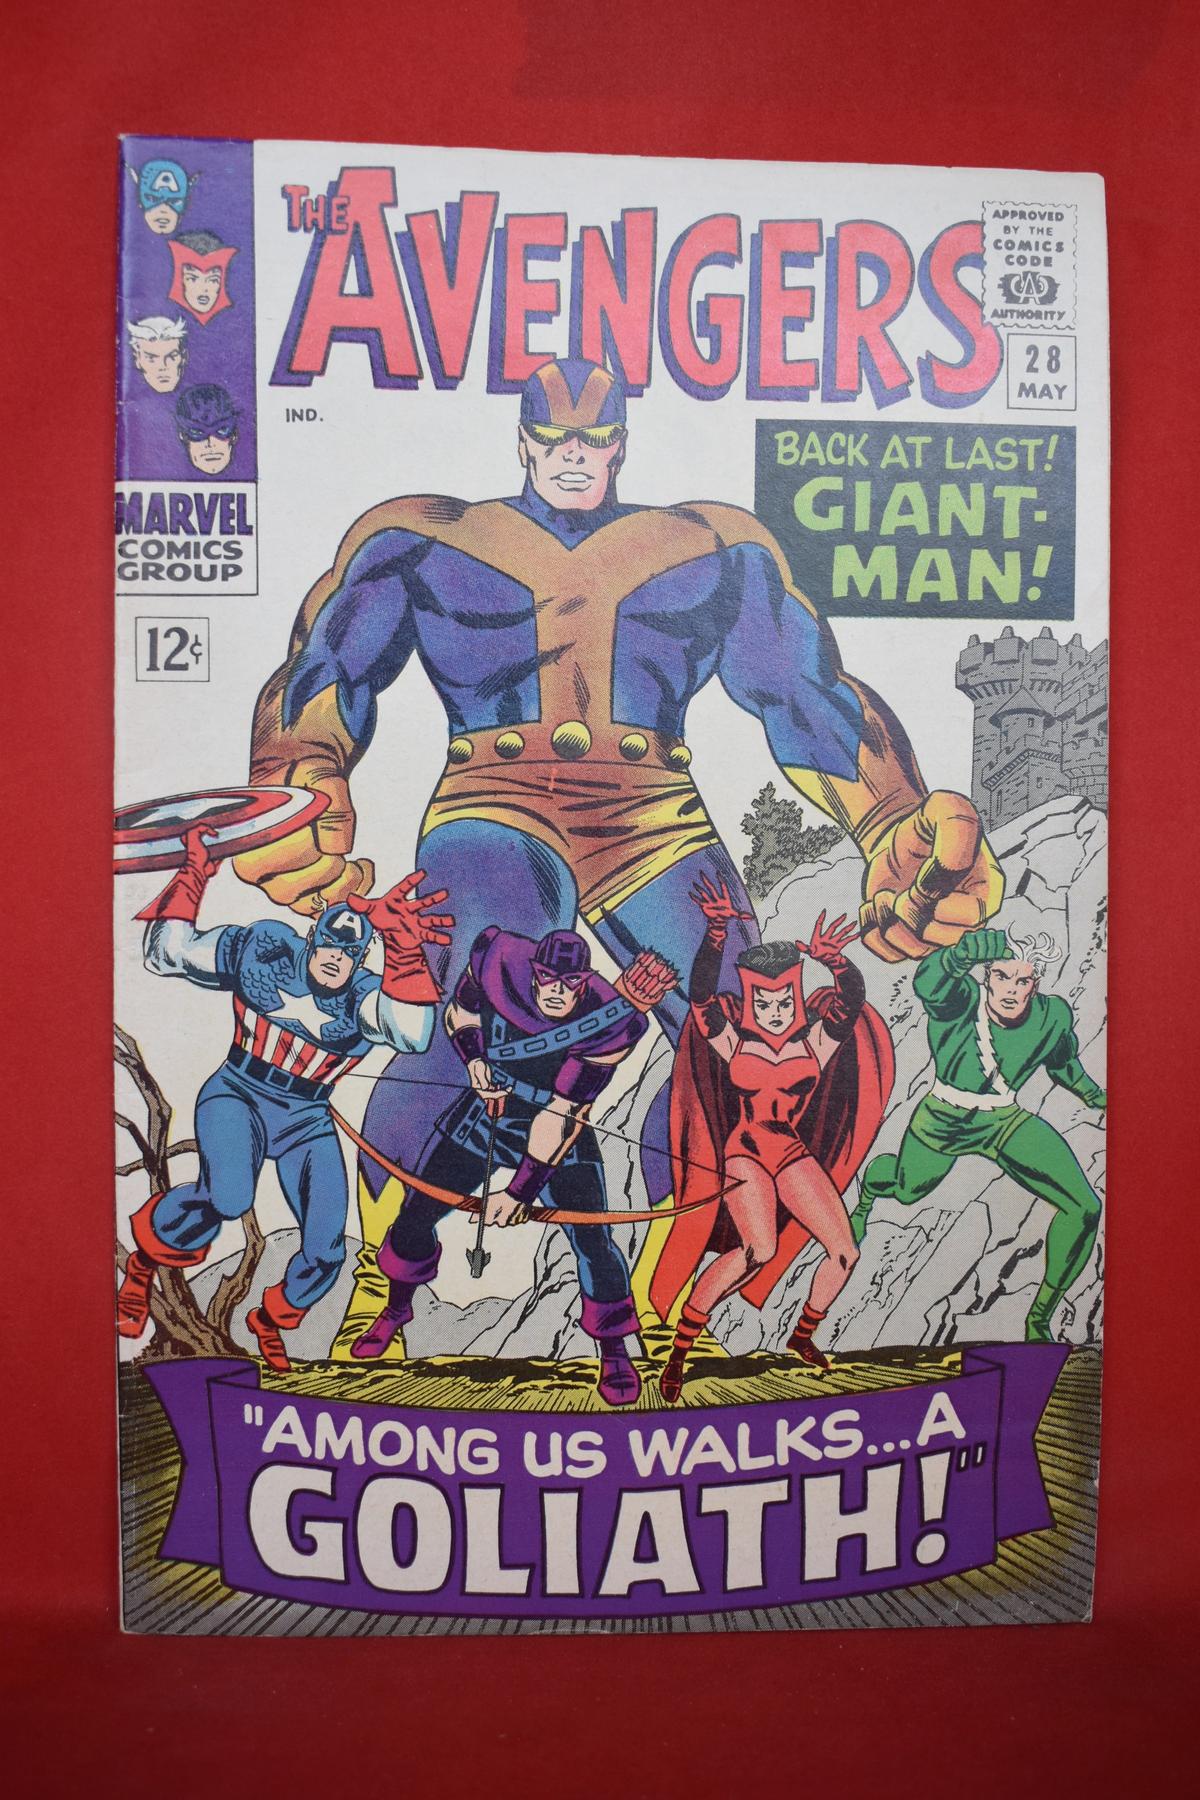 AVENGERS #28 | KEY 1ST APP OF THE COLLECTOR, HANK PYM BECOMES GOLIATH! | KIRBY & LEE - NICE BOOK!